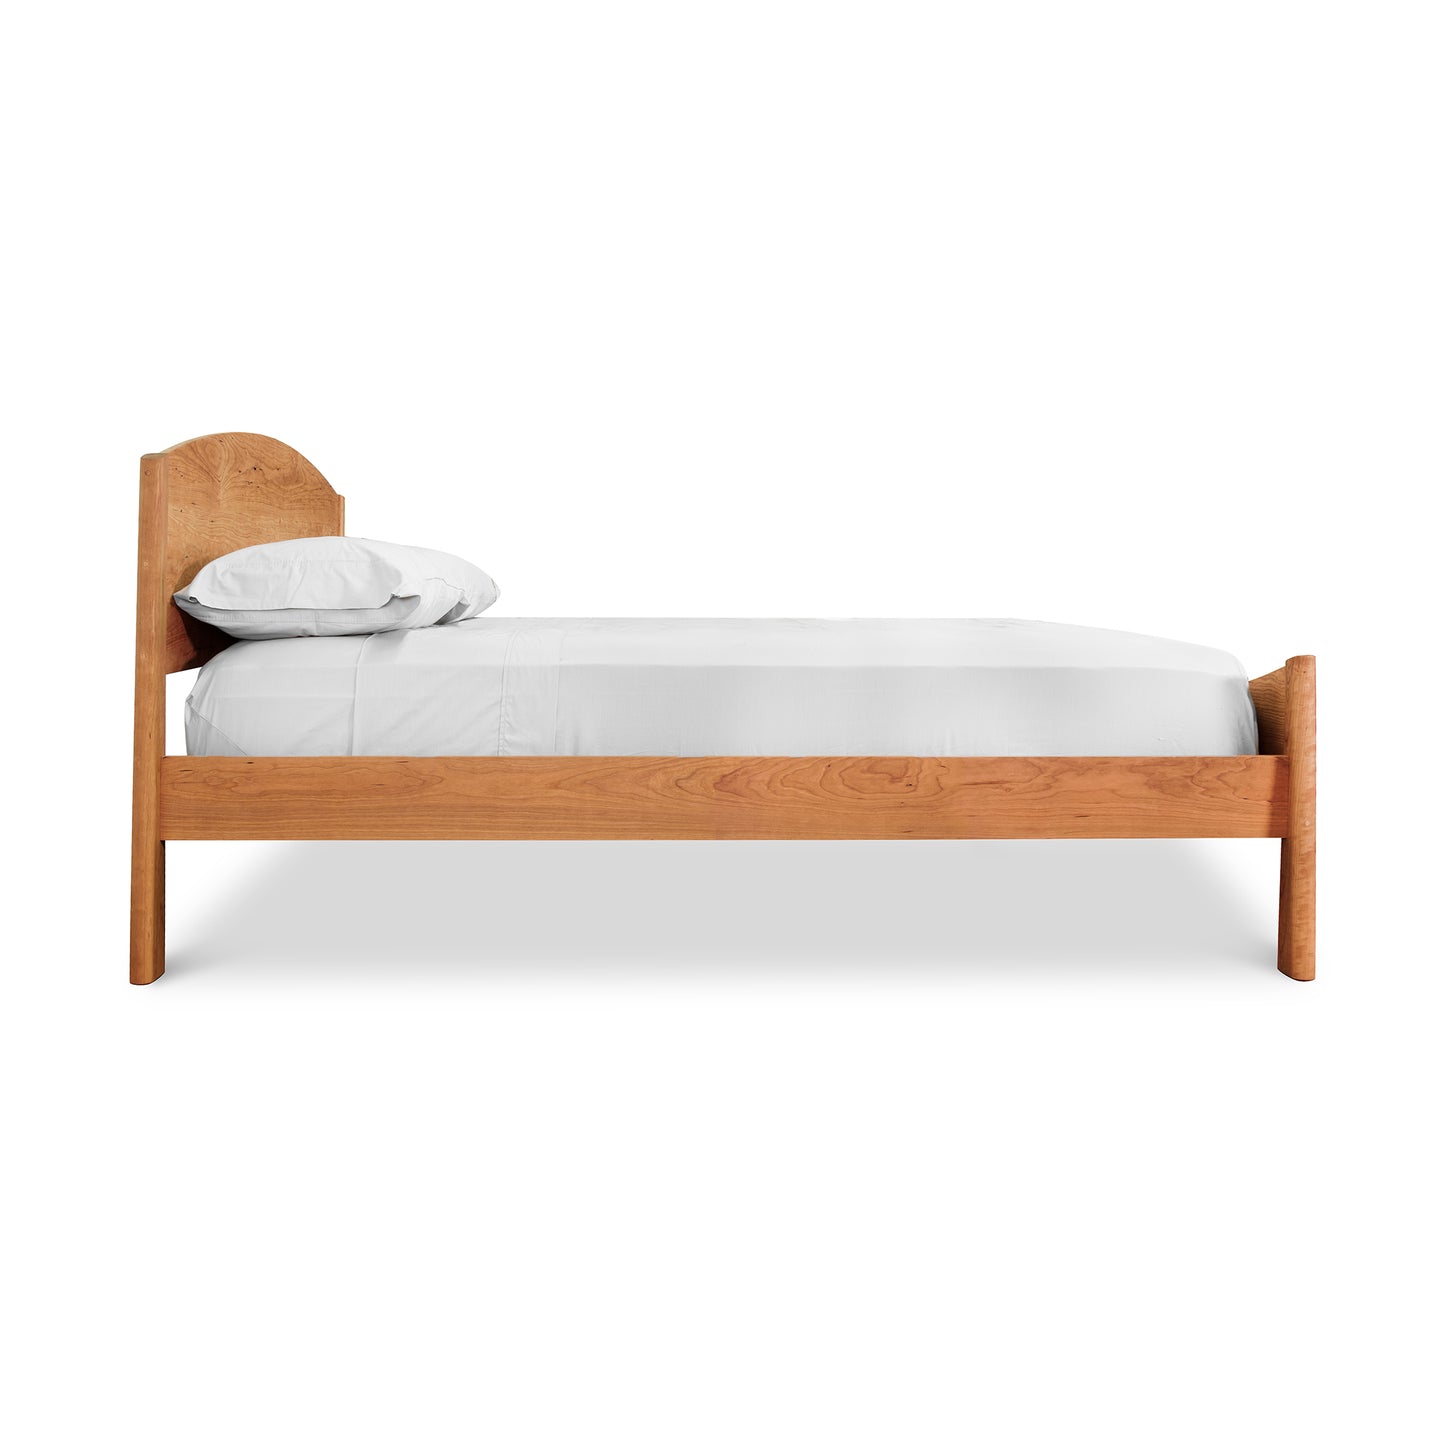 A bed with a wooden headboard and footboard.